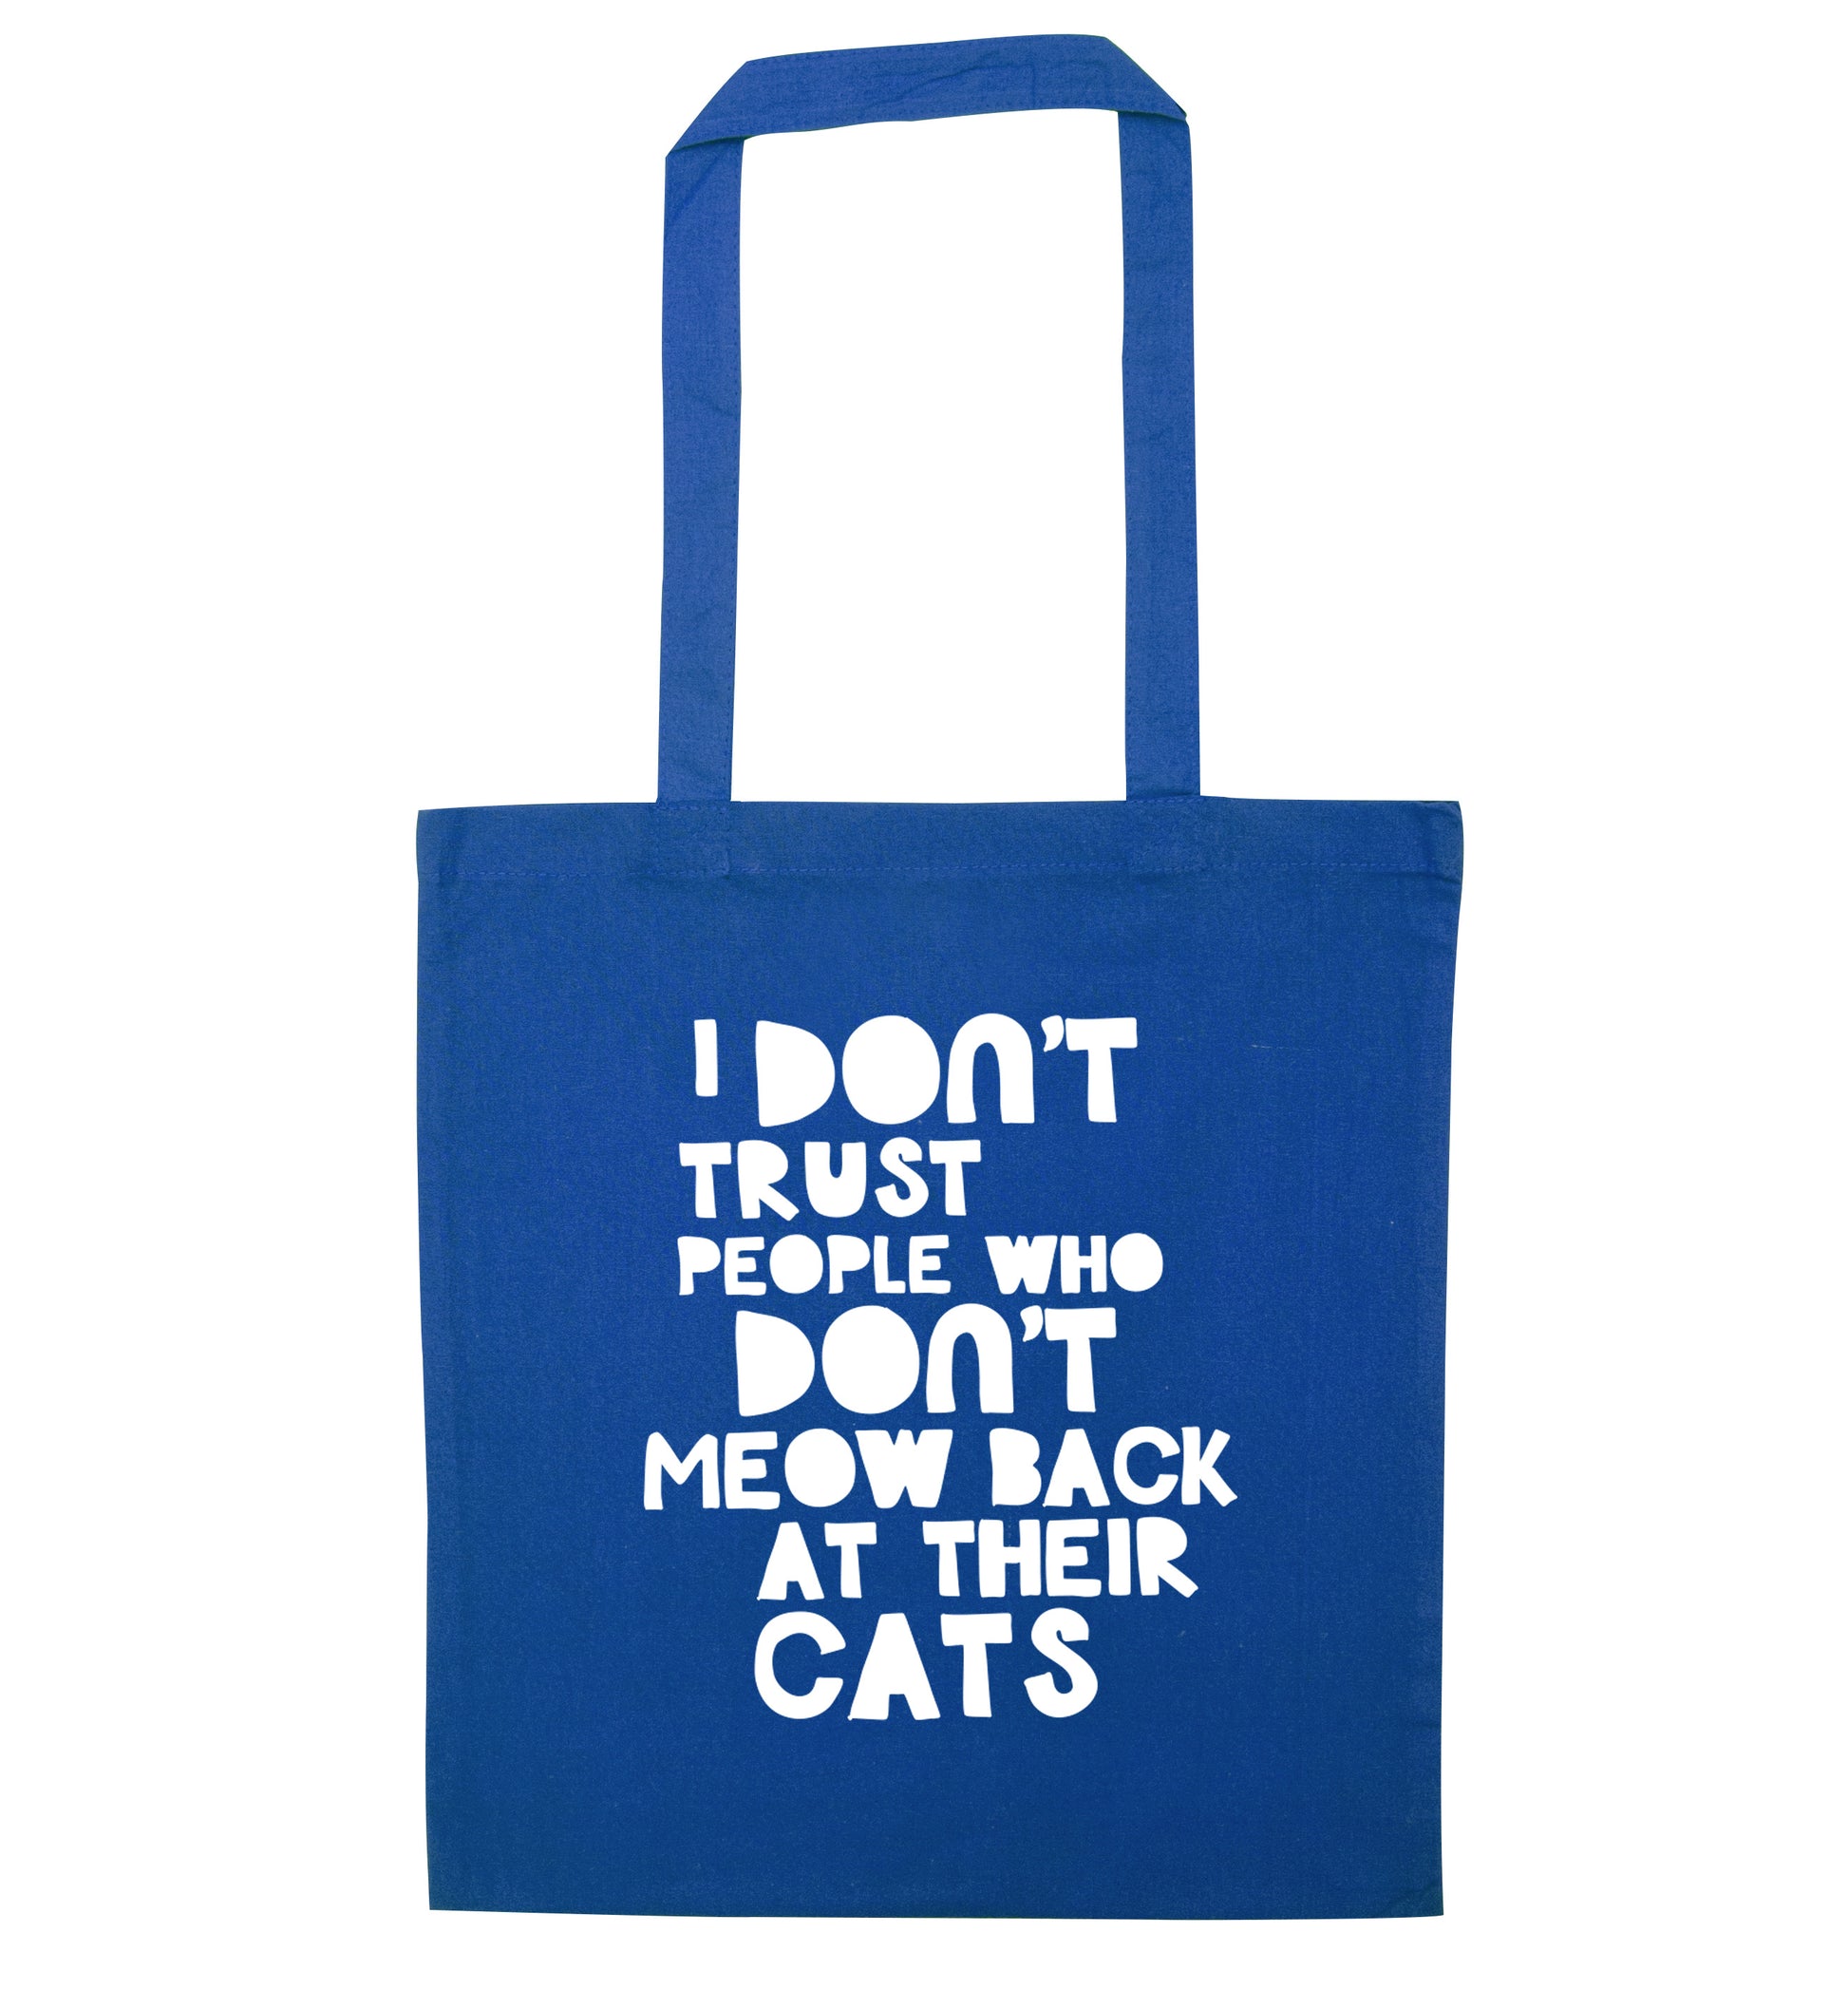 I don't trust people who don't meow back at their cats blue tote bag